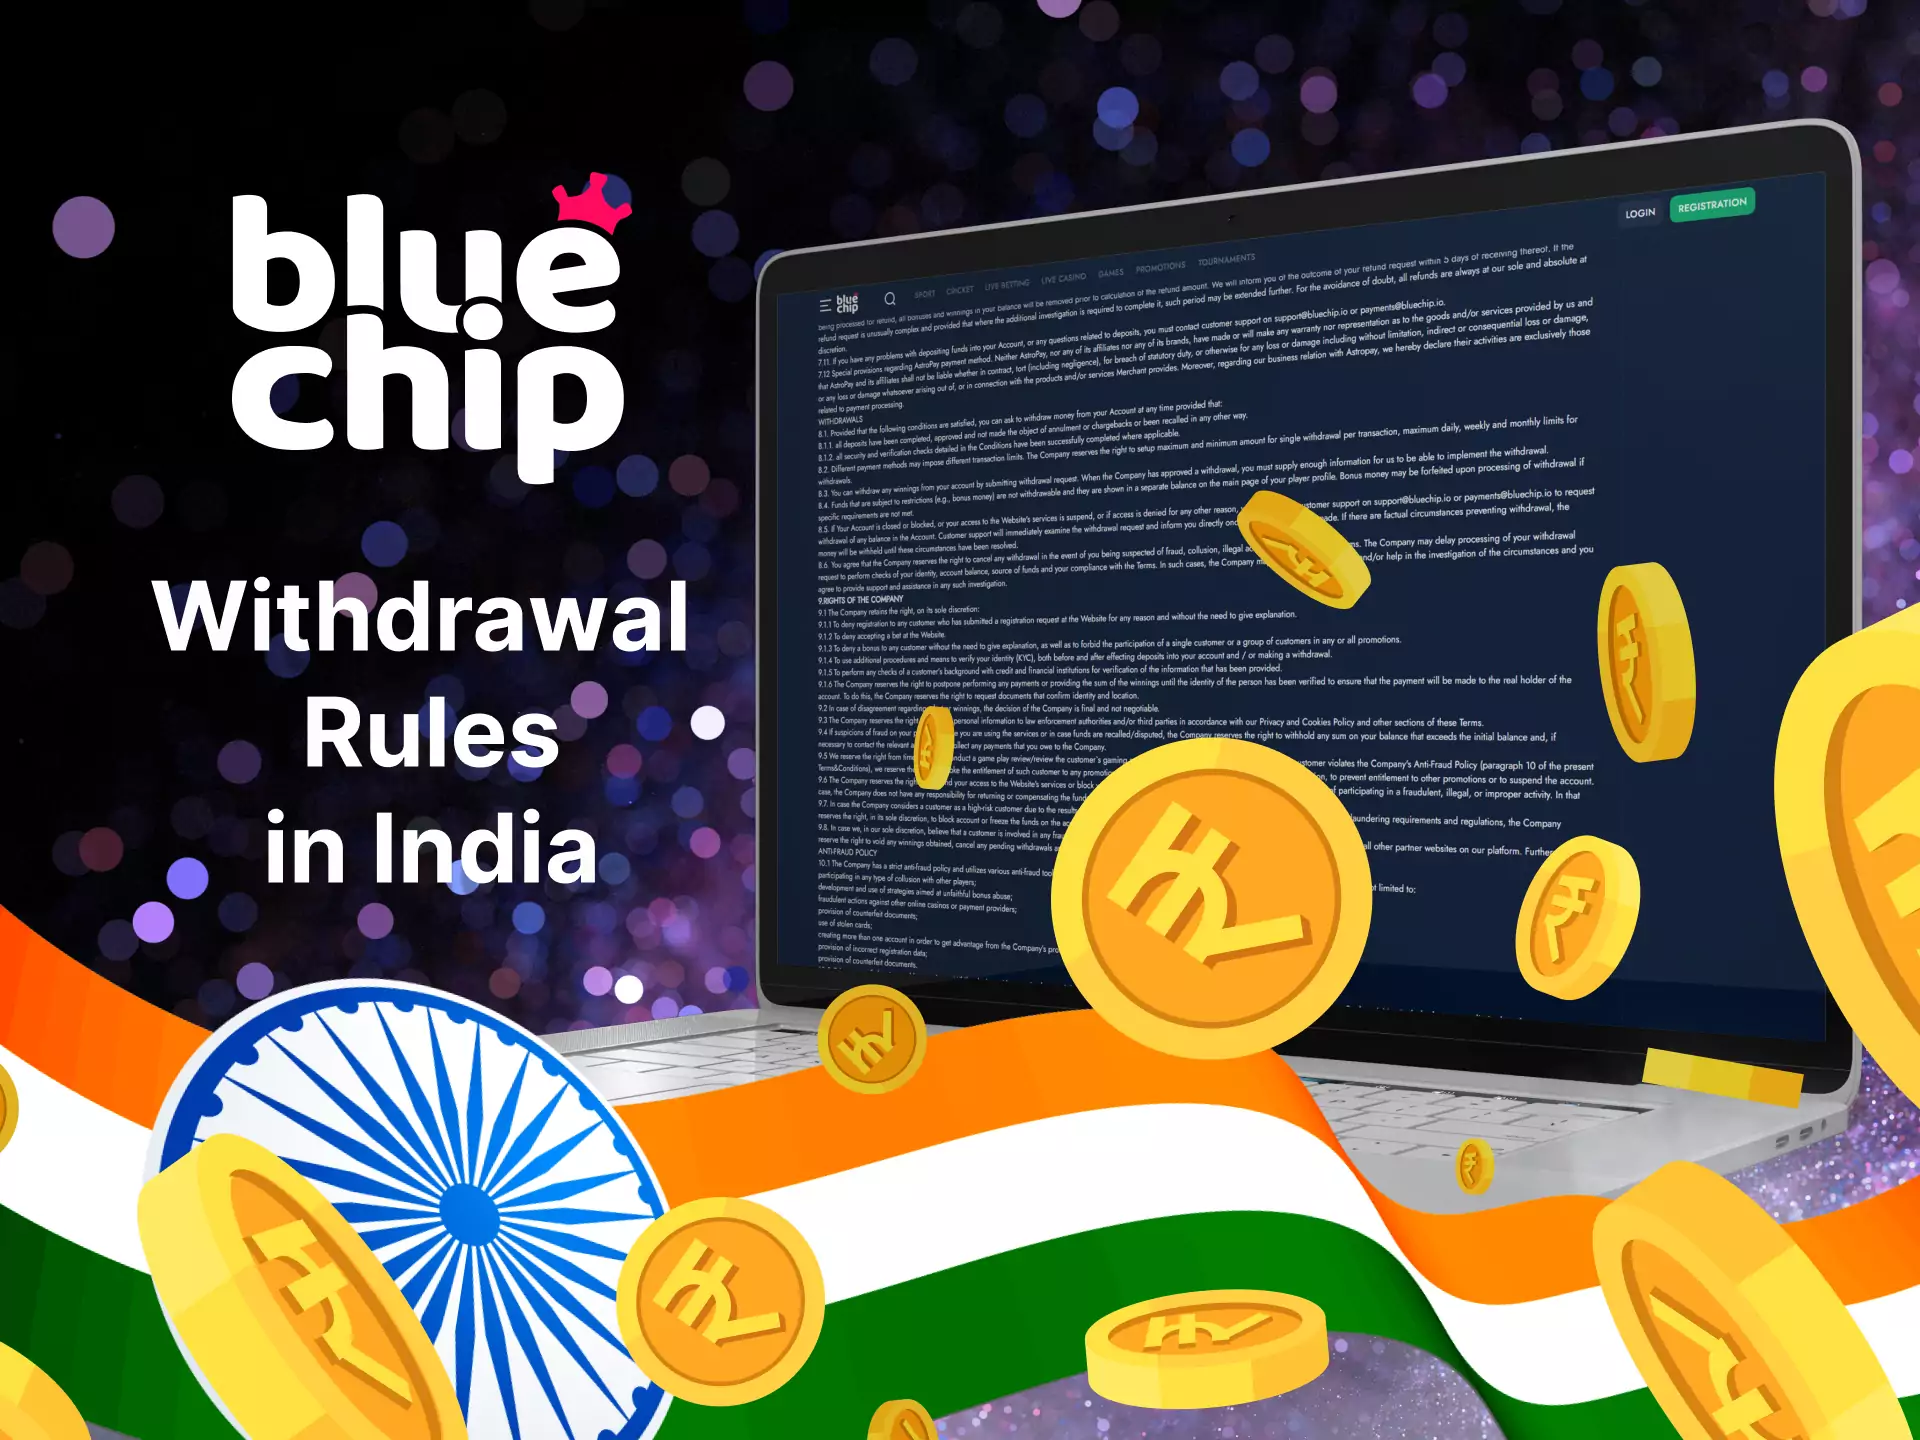 Check out the rules for withdrawing funds from Bluechip in India.